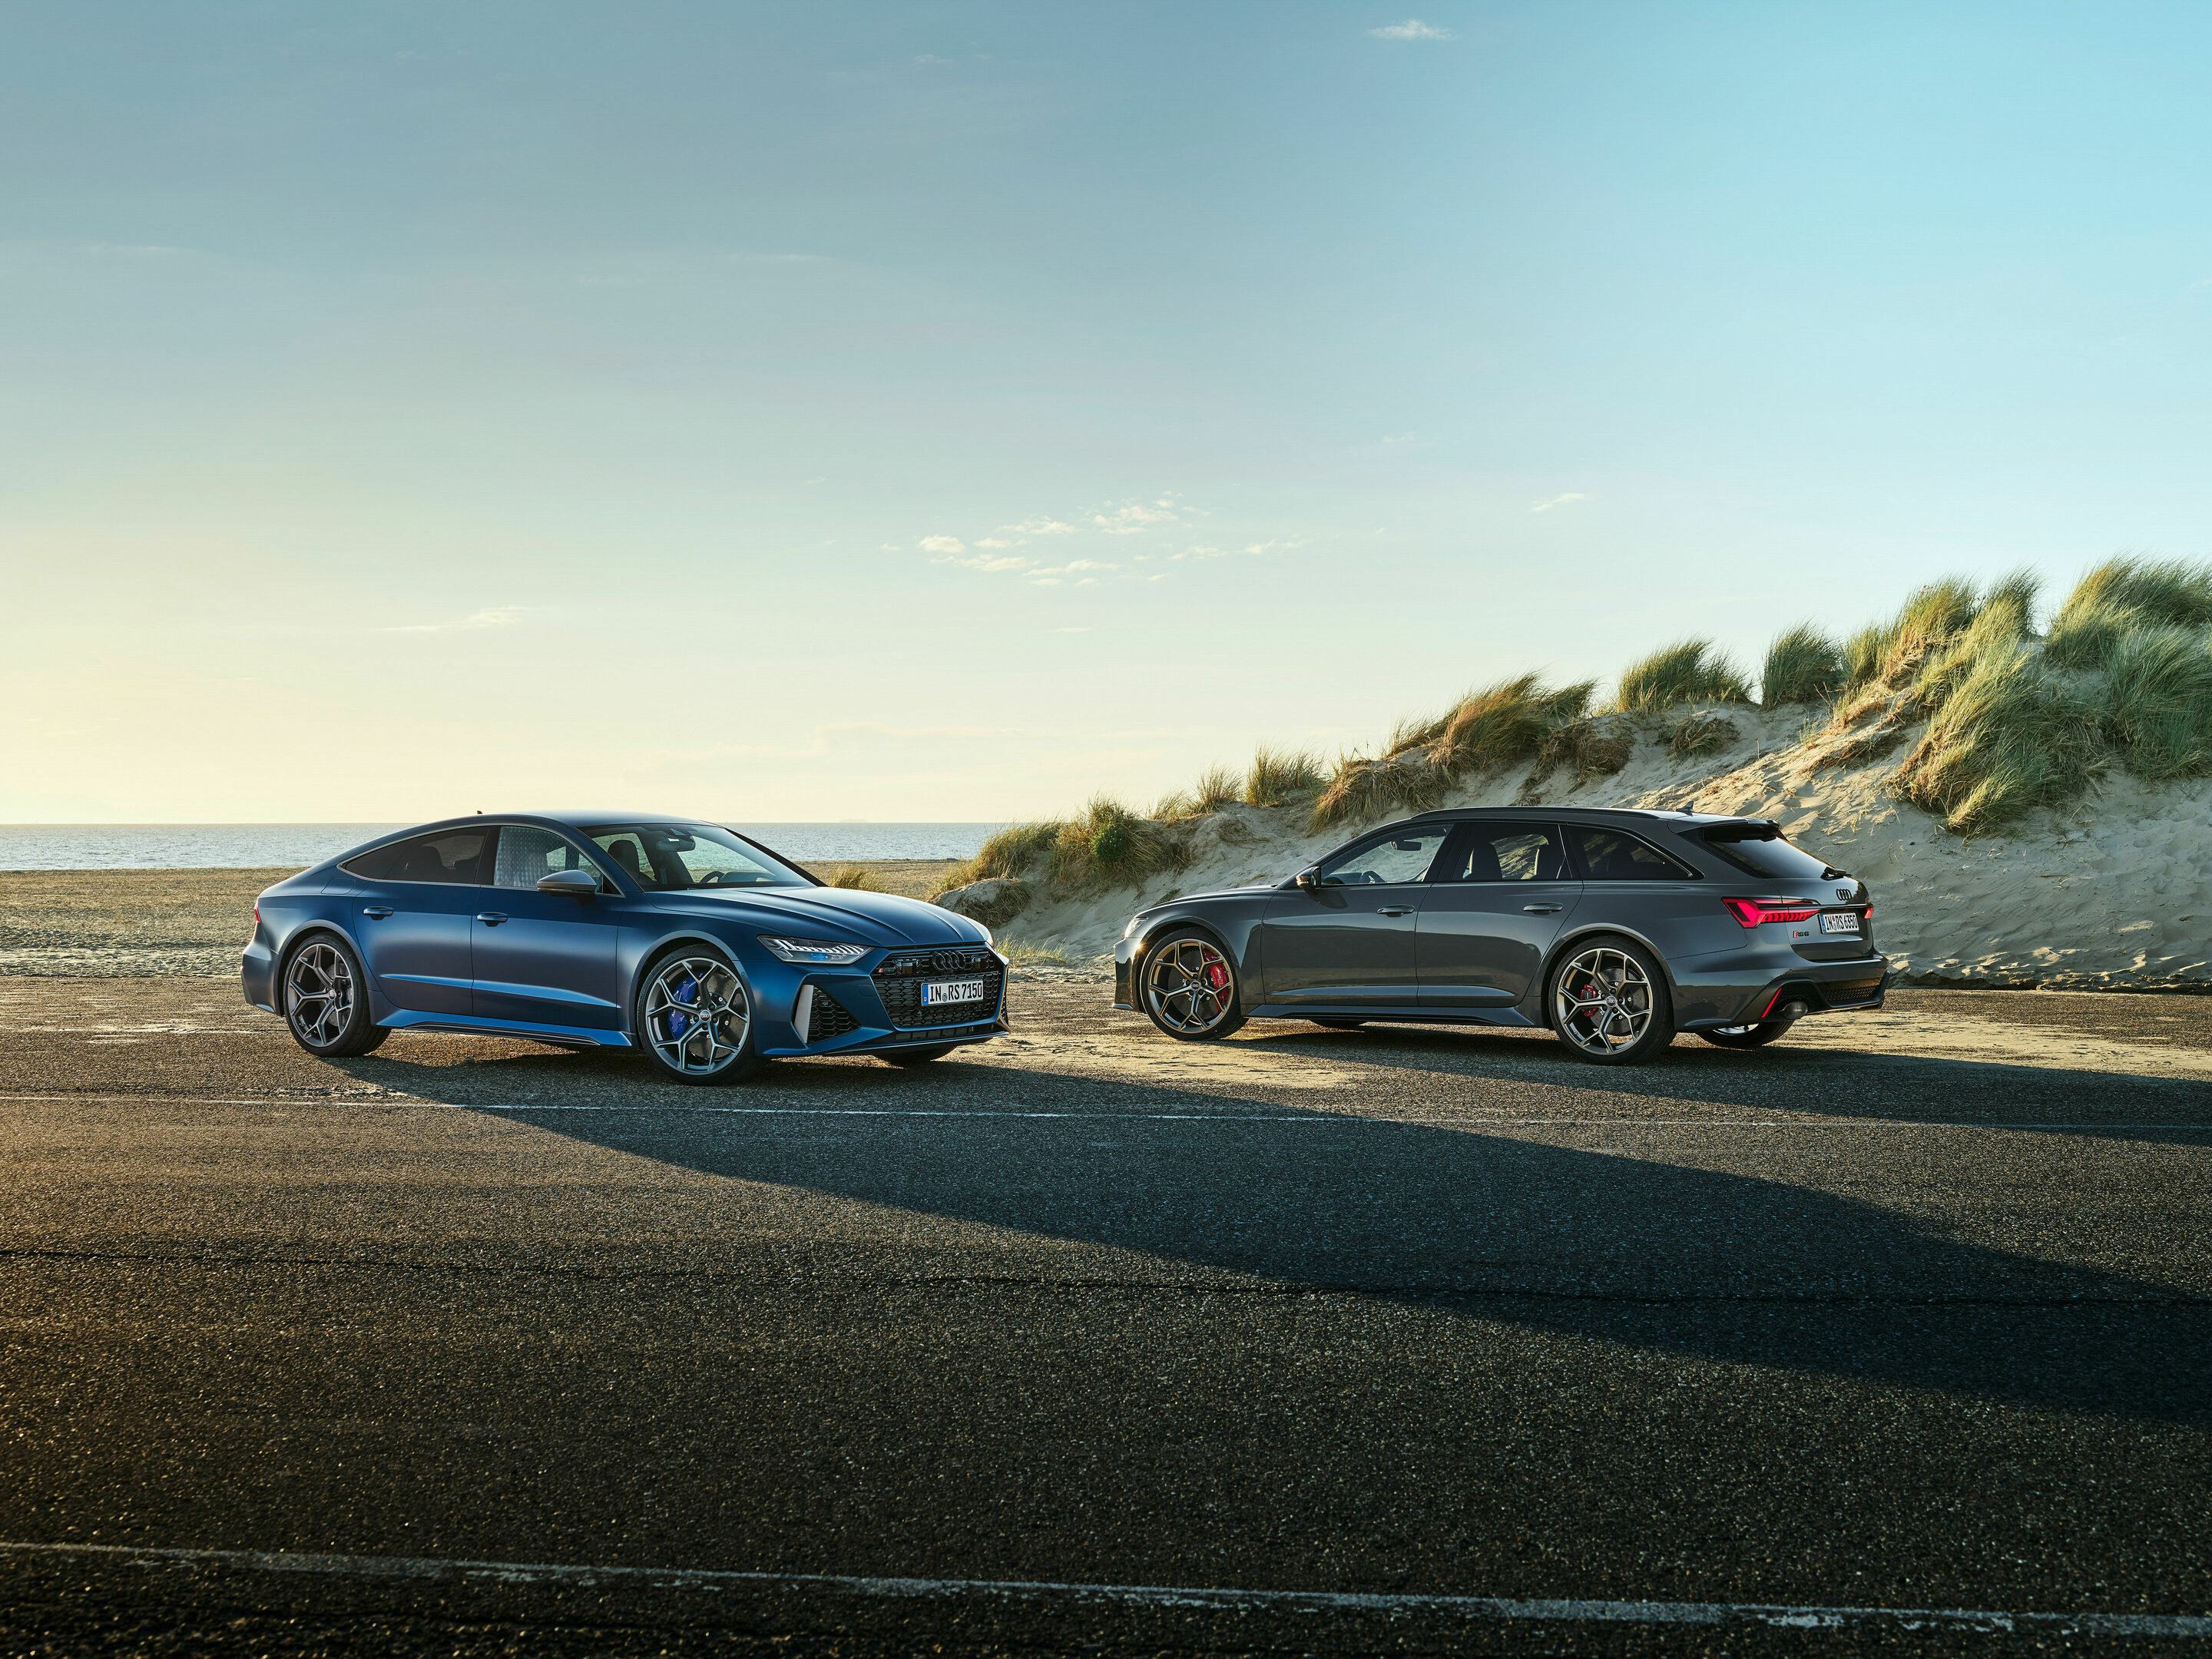 The Upgraded Audi RS 6 Avant performance